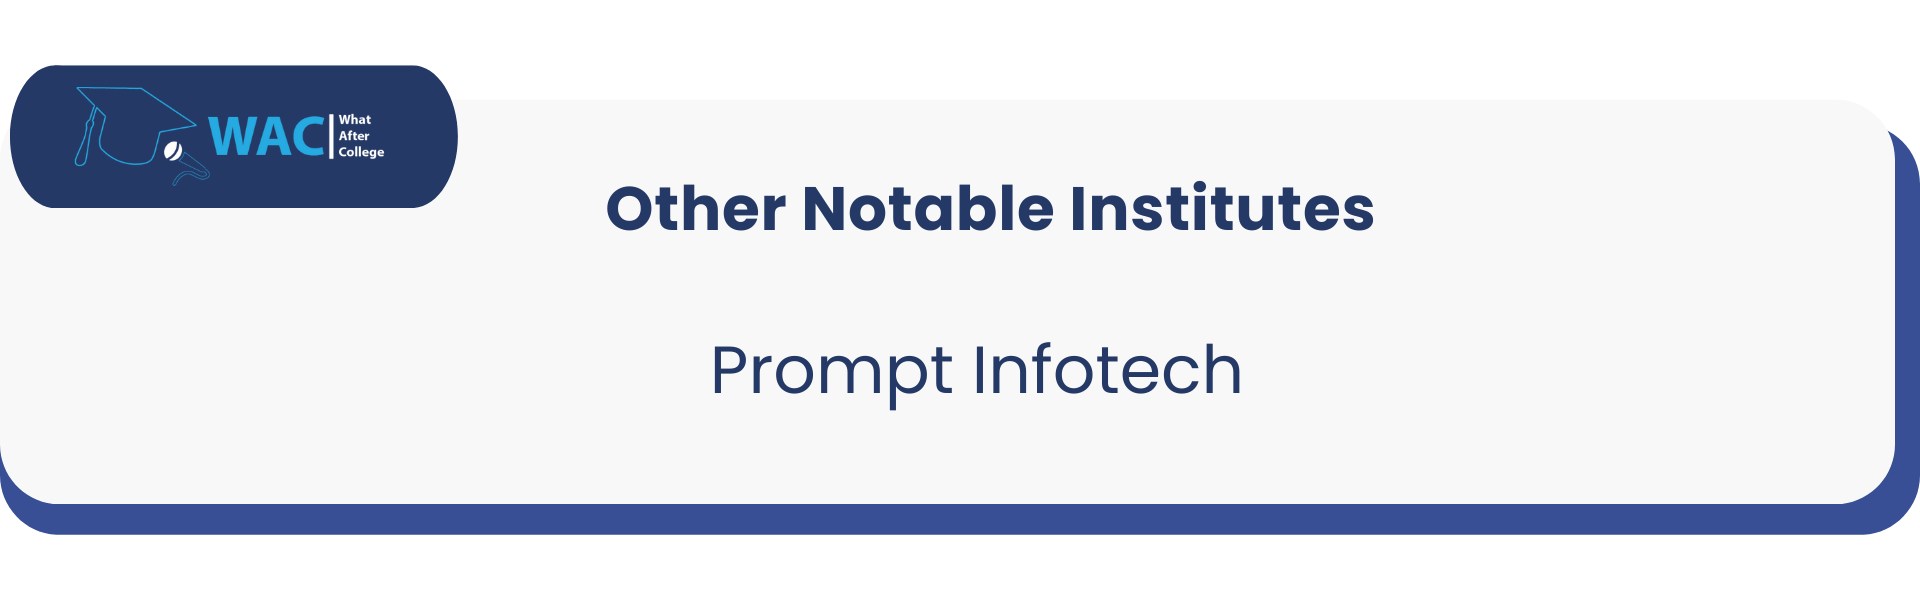 Other: 1 Prompt Infotech